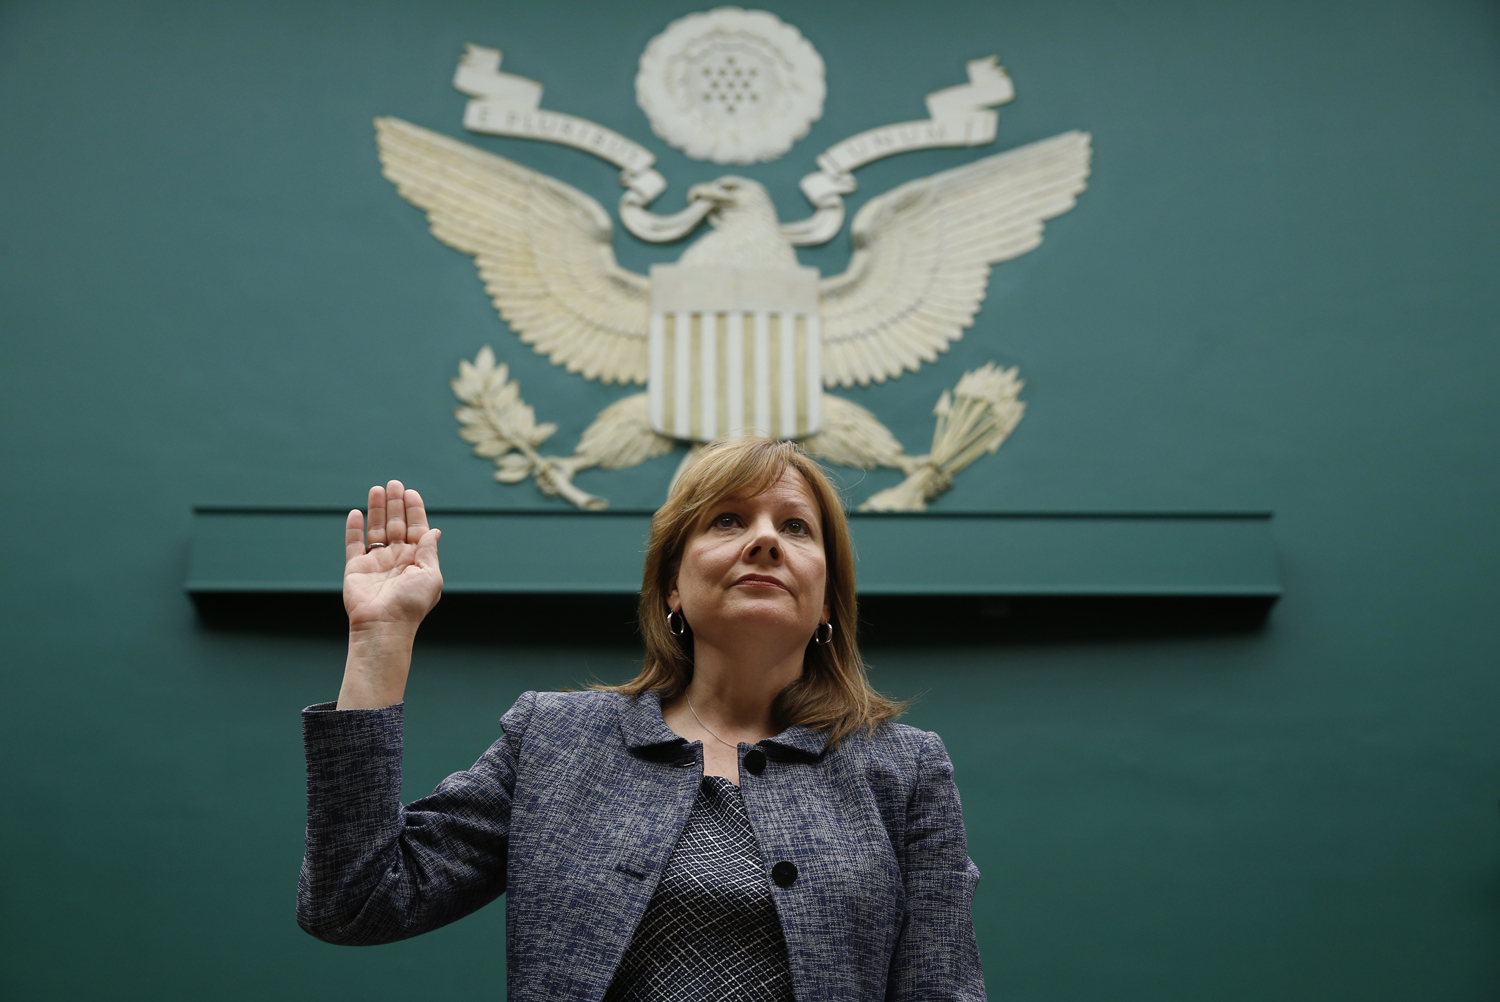 GM CEO Barra is sworn in prior to testifying before a House Energy and Commerce Committee hearing on Capitol Hill in Washington